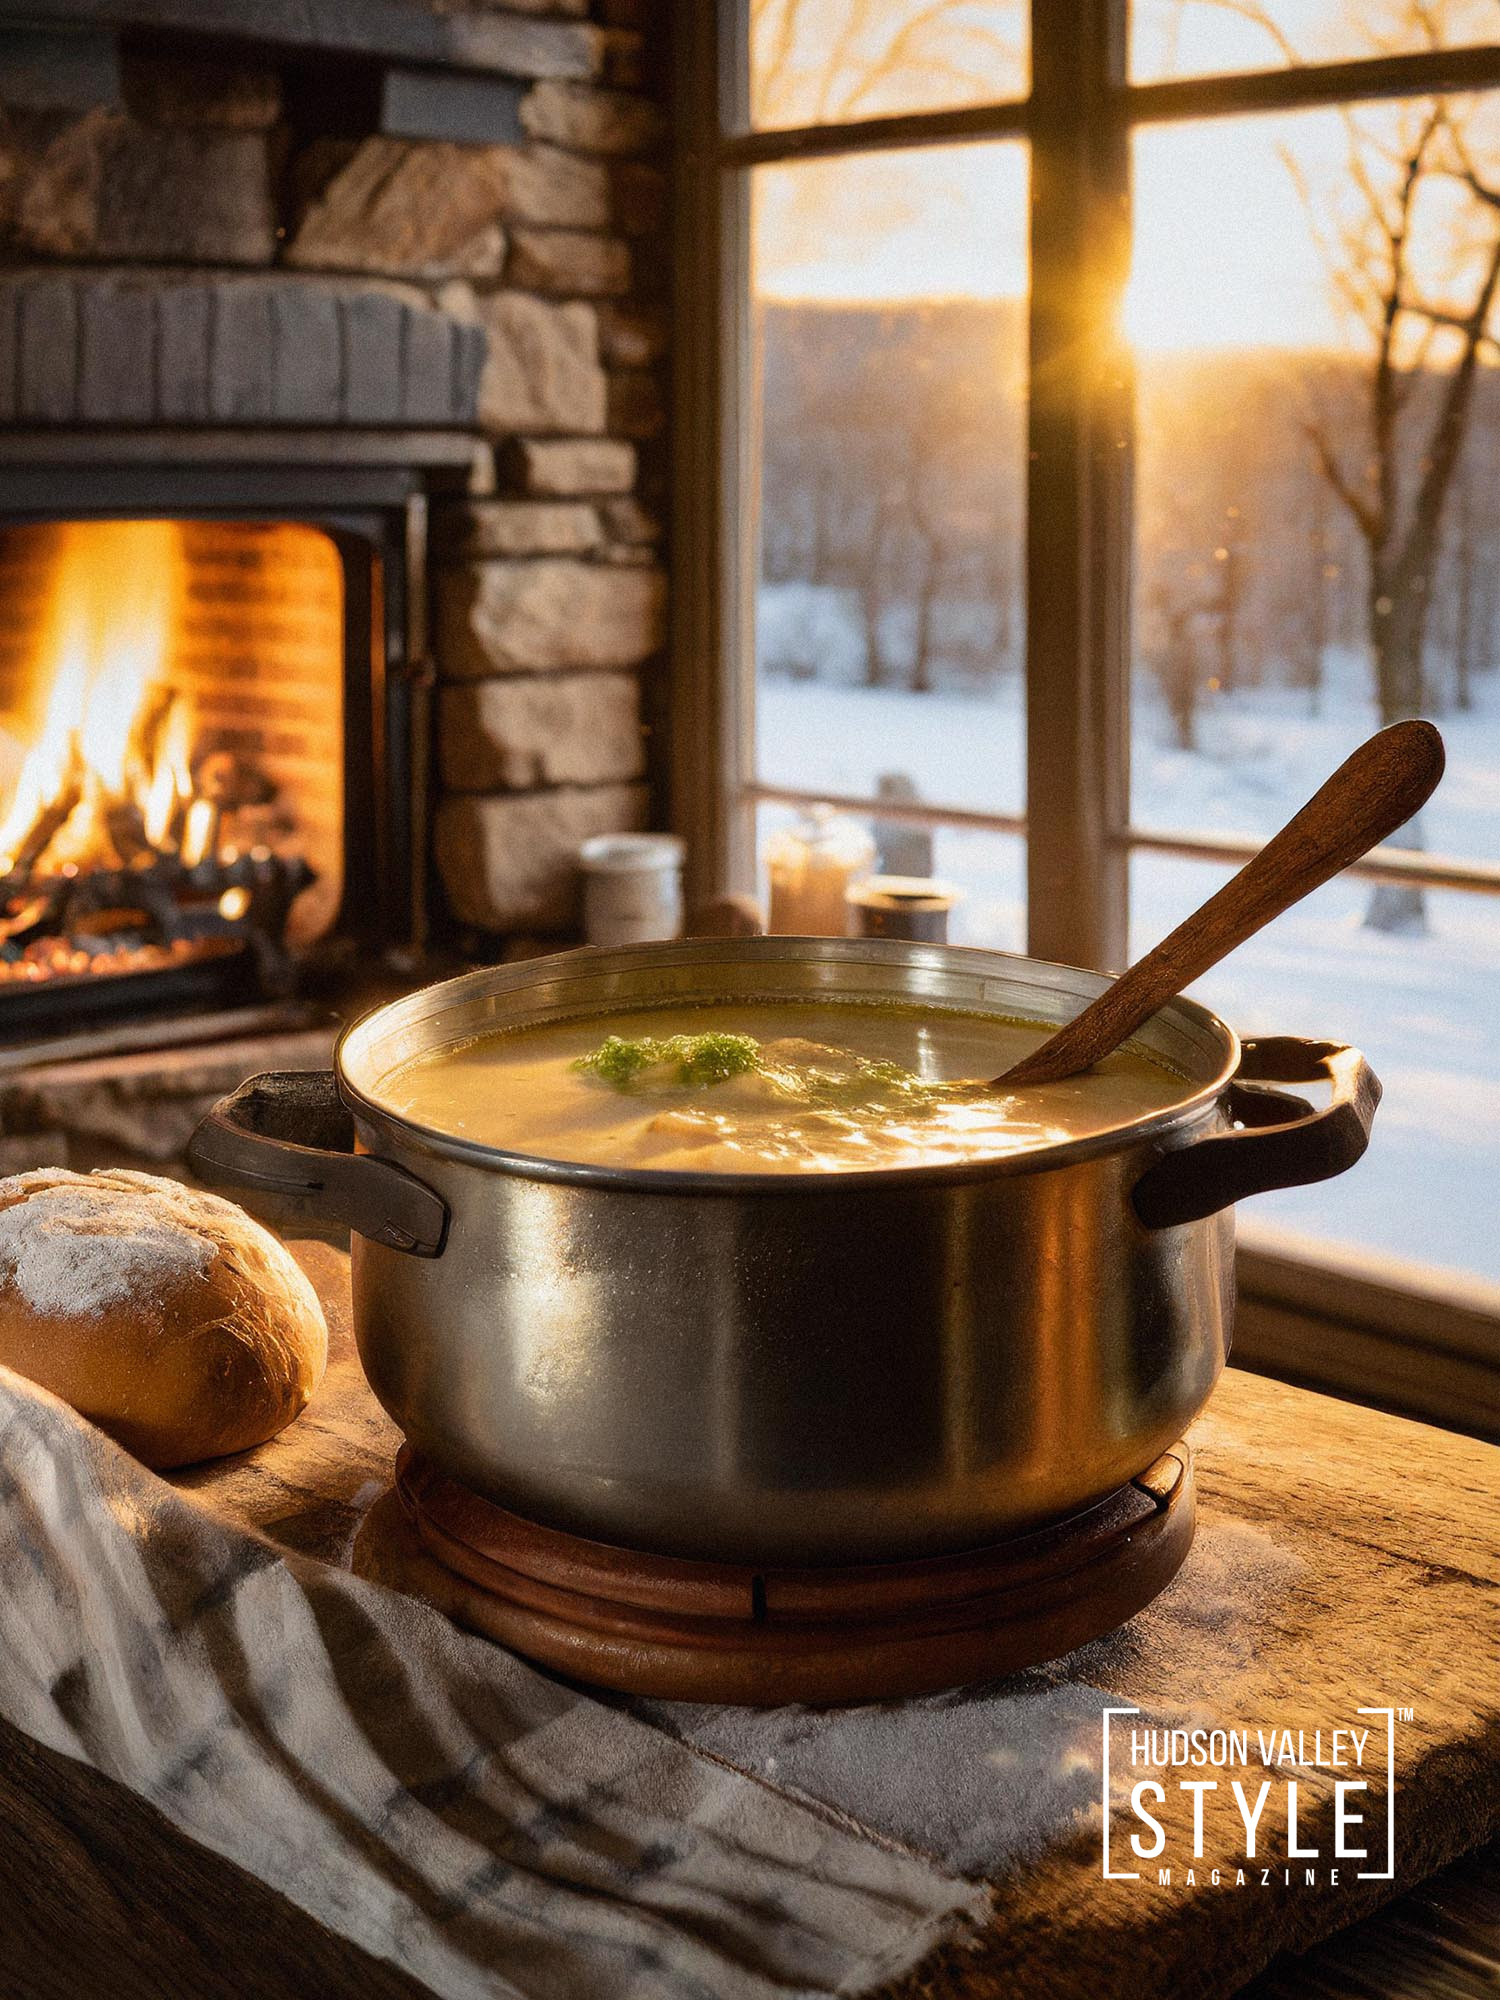 Winter Comforts: A Cozy Culinary Journey in Hudson Valley – Rustic Potato Leek Soup Recipe – Hudson Valley Style Cooking with Maxwell Alexander – Presented by Alluvion Vacations